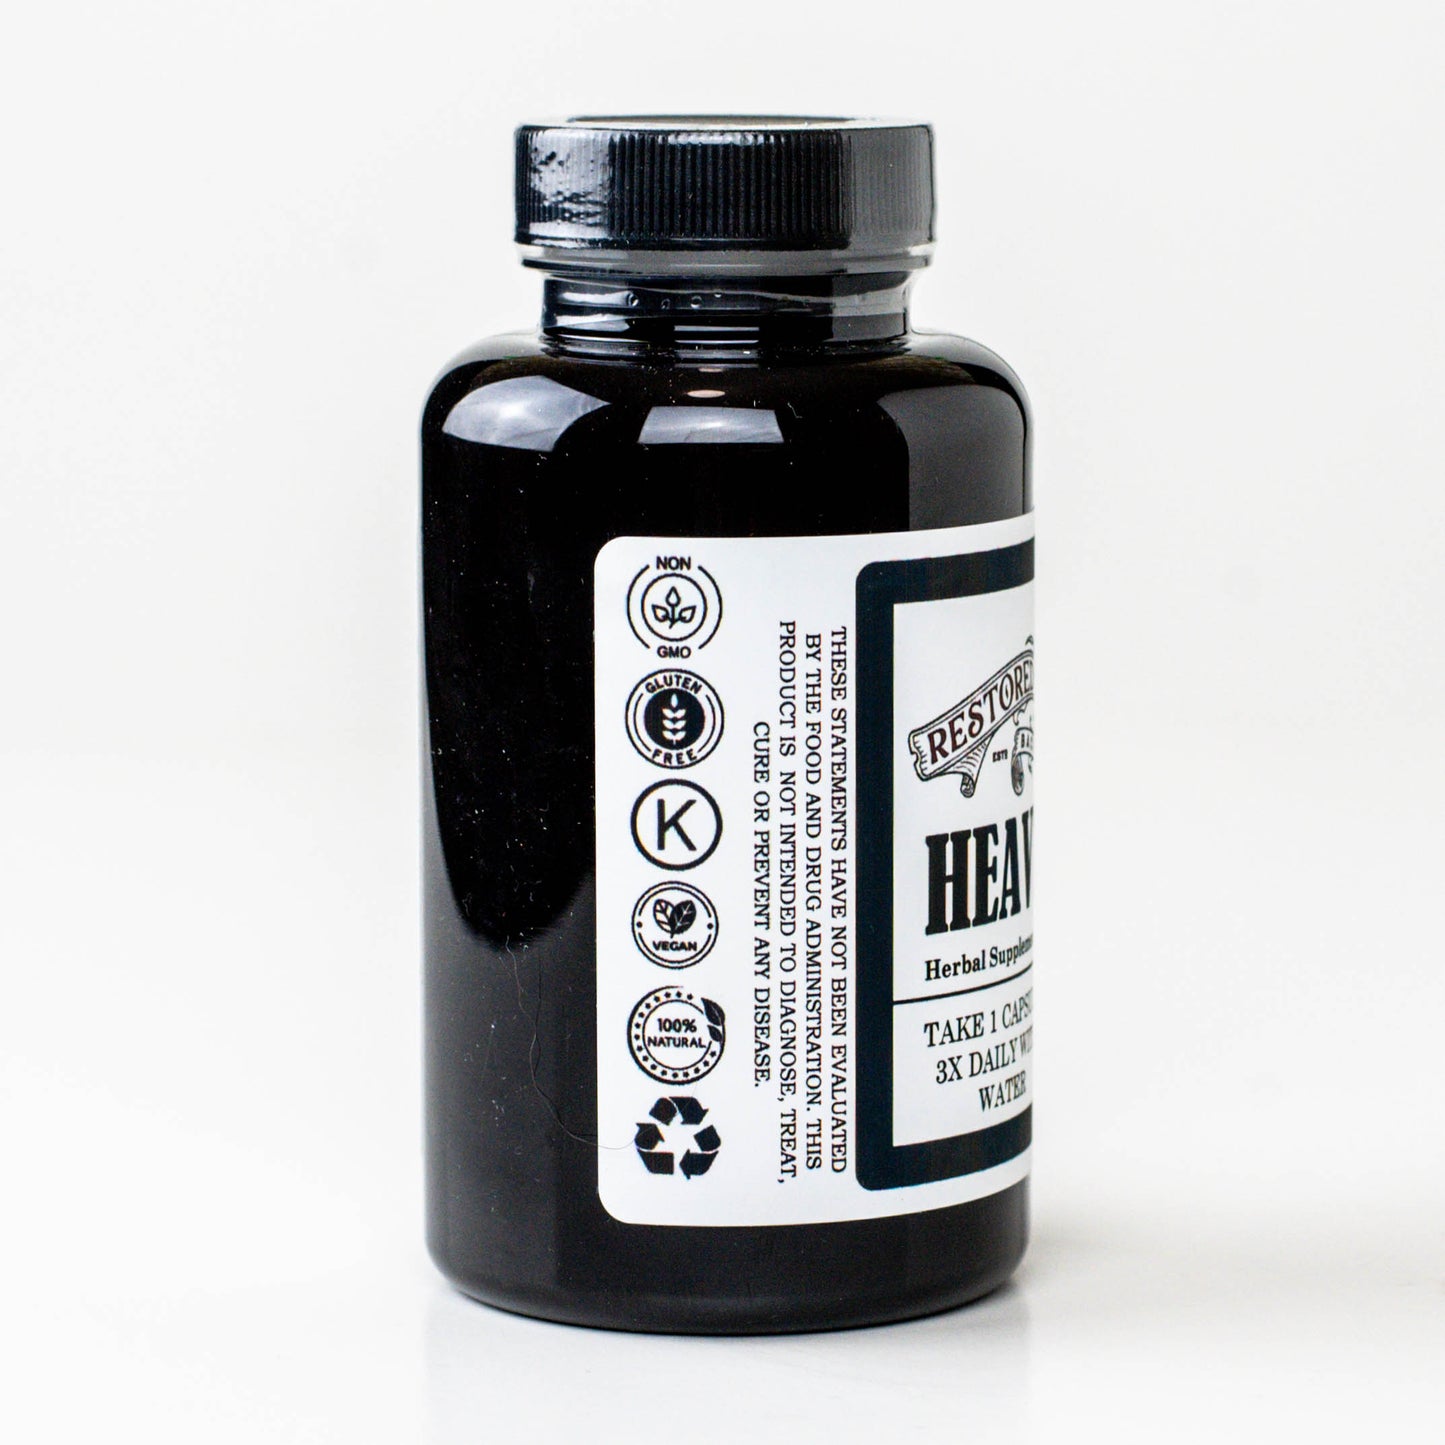 Heavy Metal Extract or Capsules